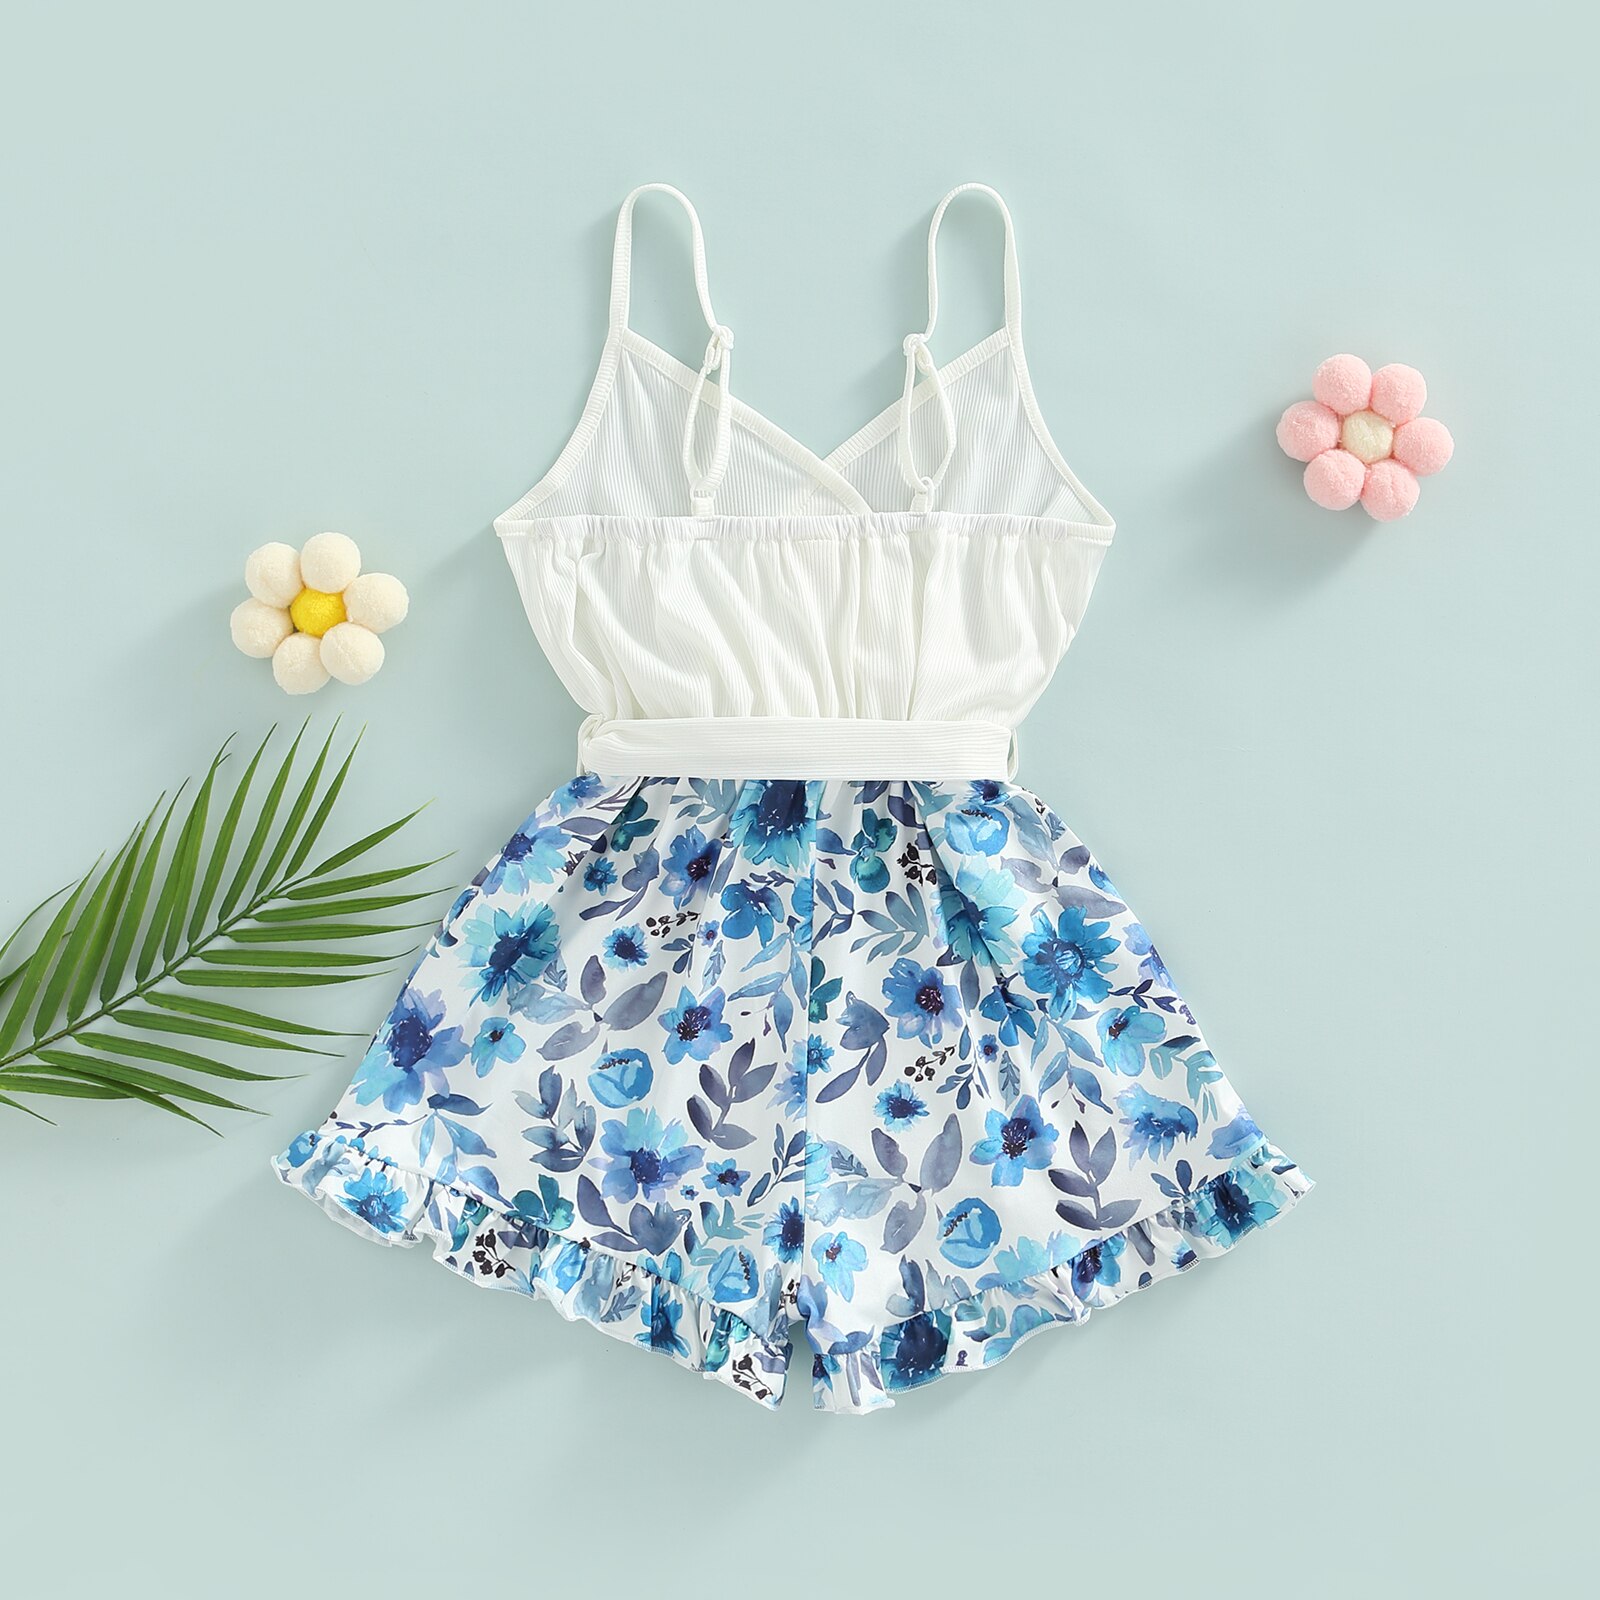 Kid-Baby-Girls-Summer-Short-Romper-Floral-Print-Sleeveless-Ruffled-Wide-Leg-Jumpsuit-Clothes-with-Belt-2